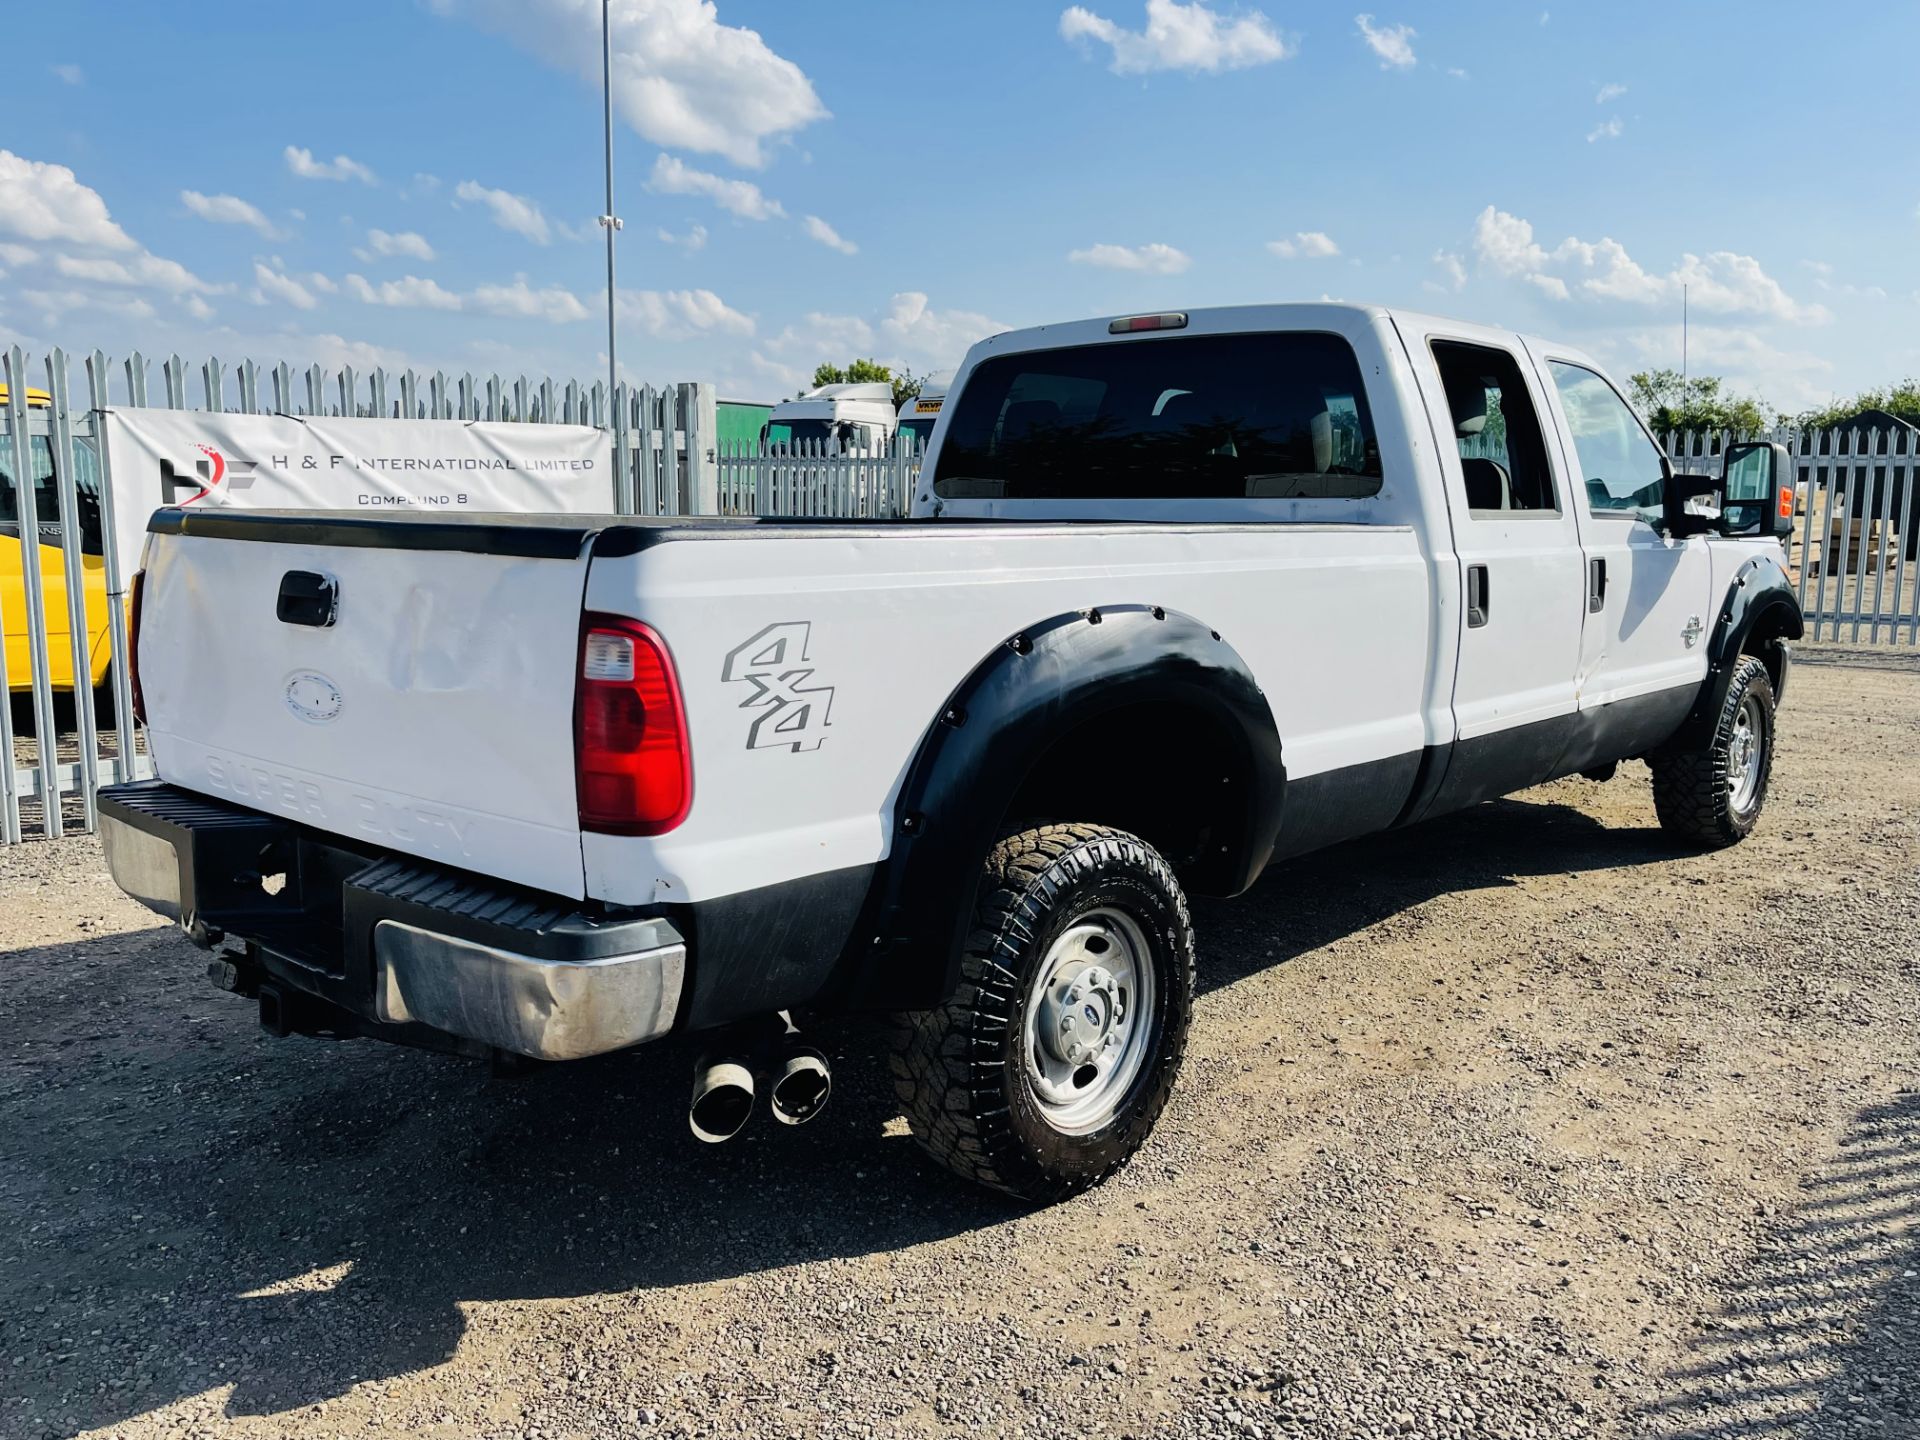 Ford F350 6.7 V8 **DIESEL** Super-Duty Edition Crew-Cab XLT - '2011 Year'' Automatic ***RARE*** - Image 17 of 25